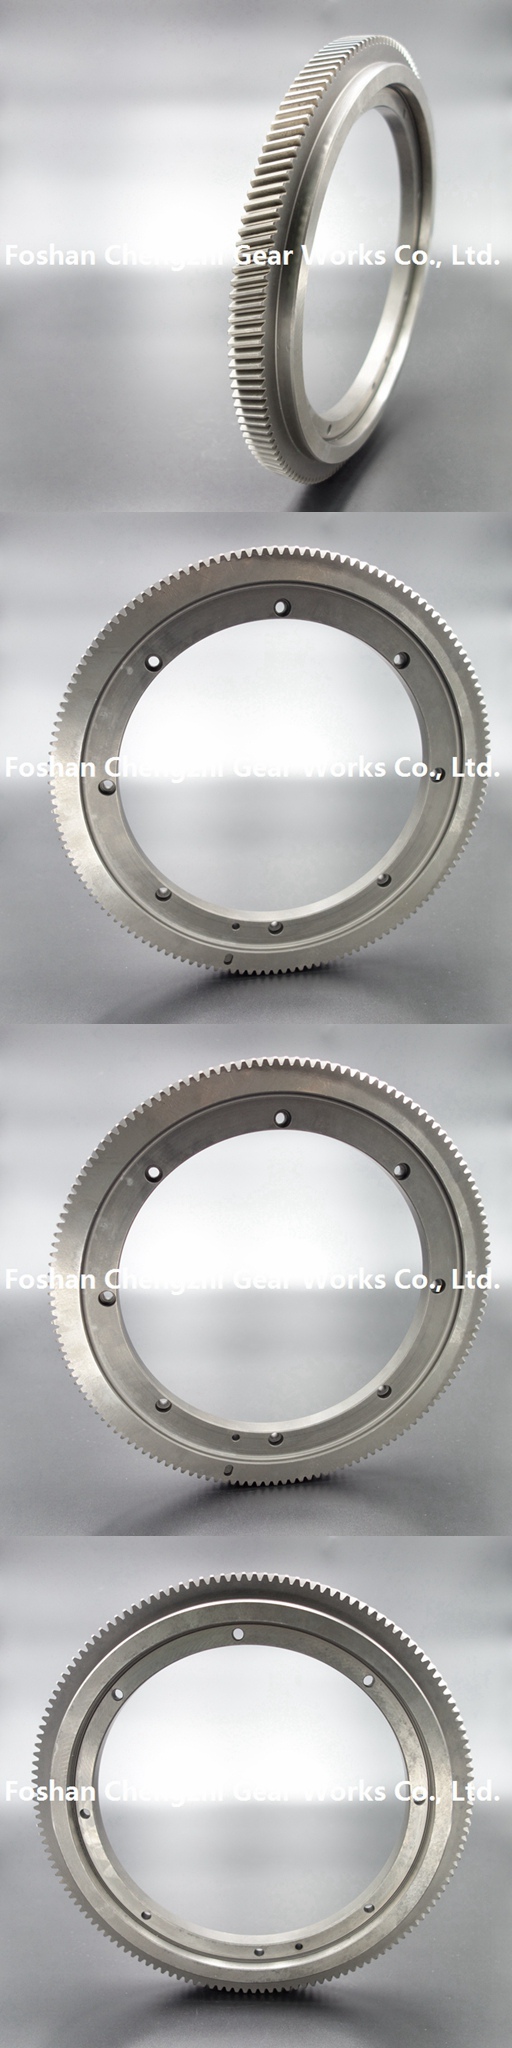 Good Quality Customized Transmission Gear Ring Gear for Various Machinery